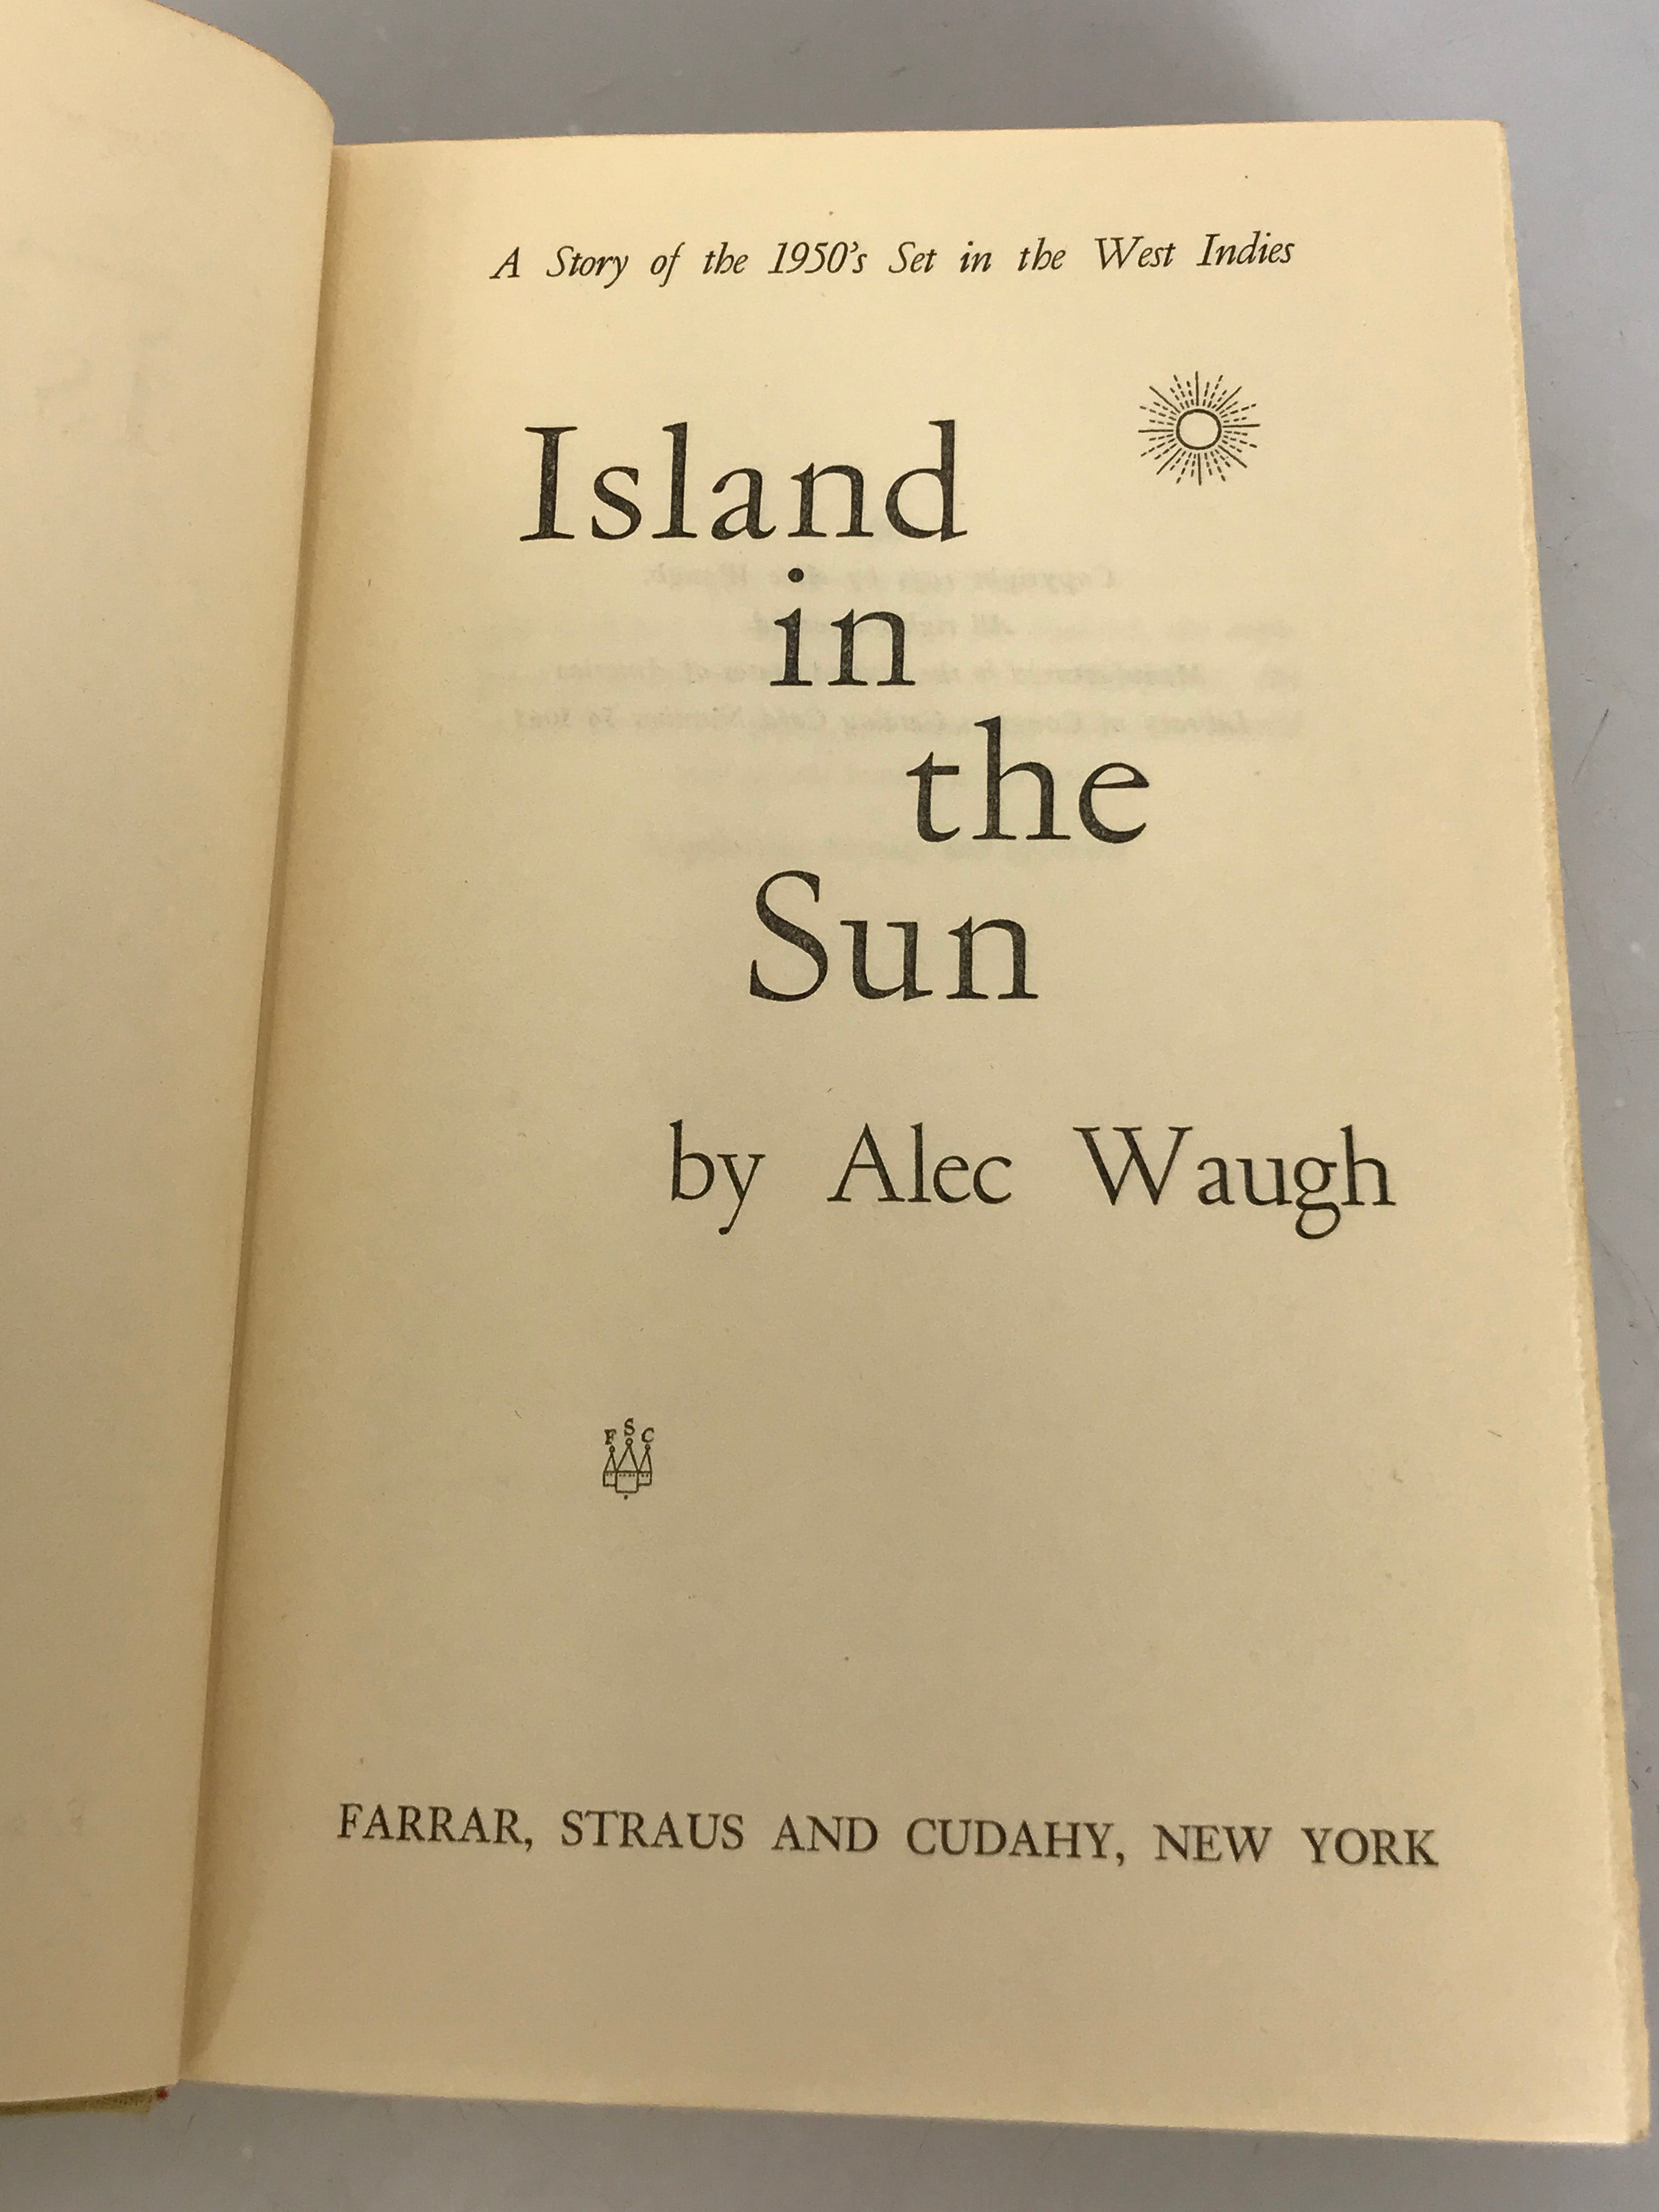 Island in the Sun by Alec Waugh A Story of the 1950s Set in the West Indies 1955 HC